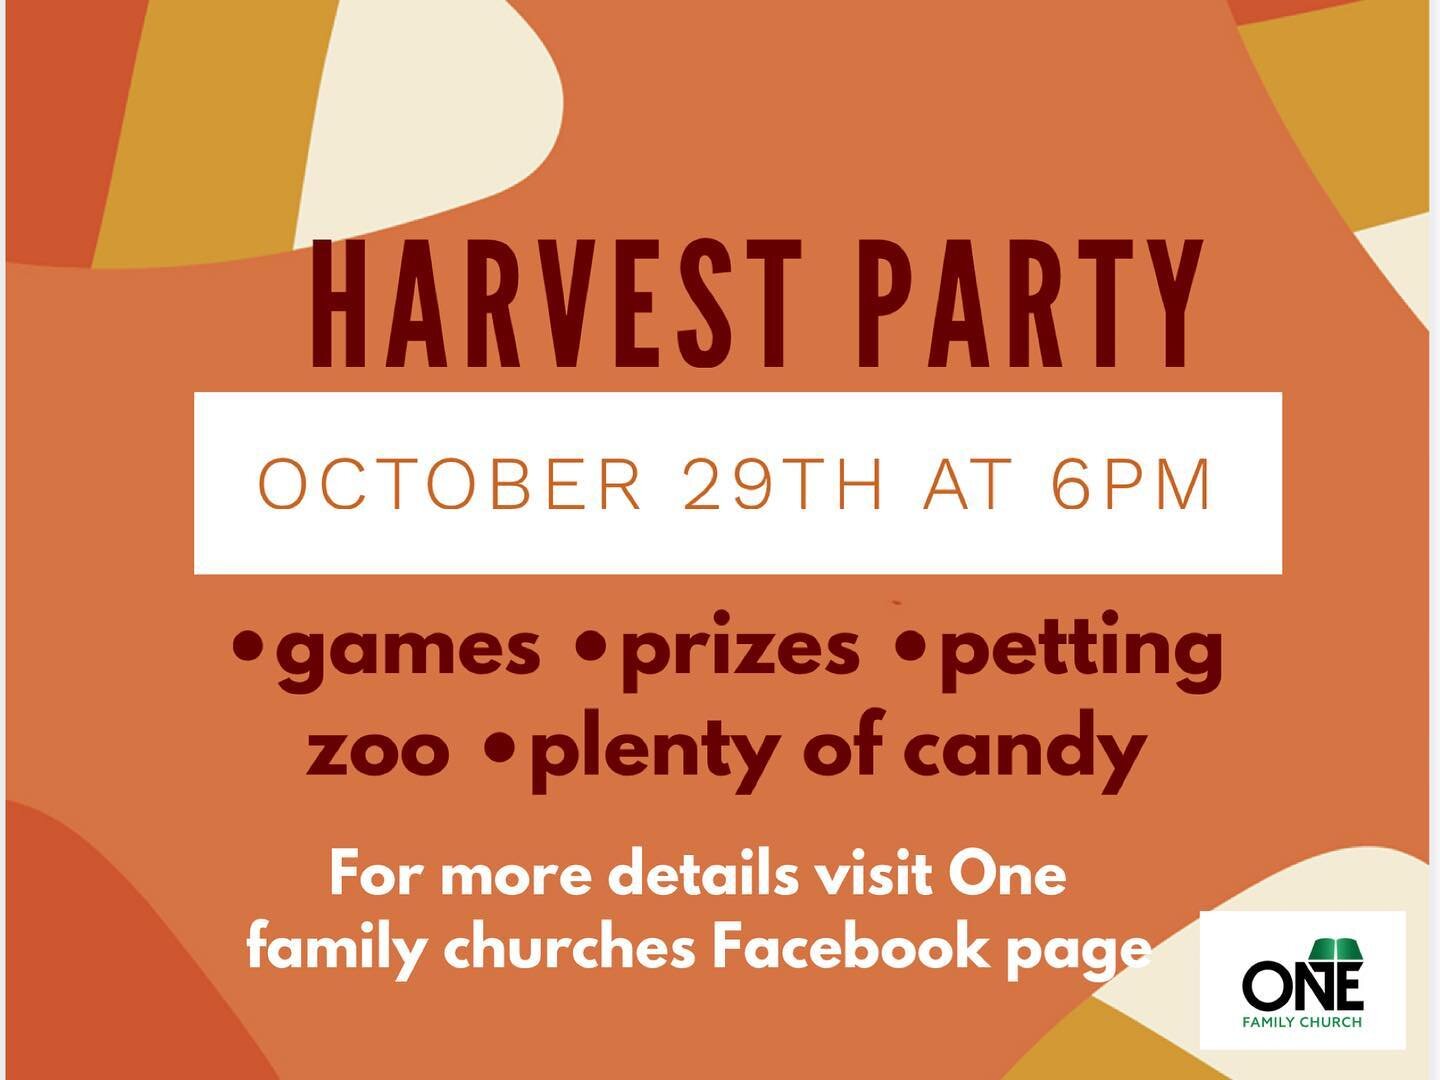 The harvest party is officially one week away! Bring the whole family out for an evening of fun and fellowship! #onefamilychurch #daytonchurches #church937 #gospelcenteredchurch #multiculturalchruch #churchplanting #daytonohio #dayton